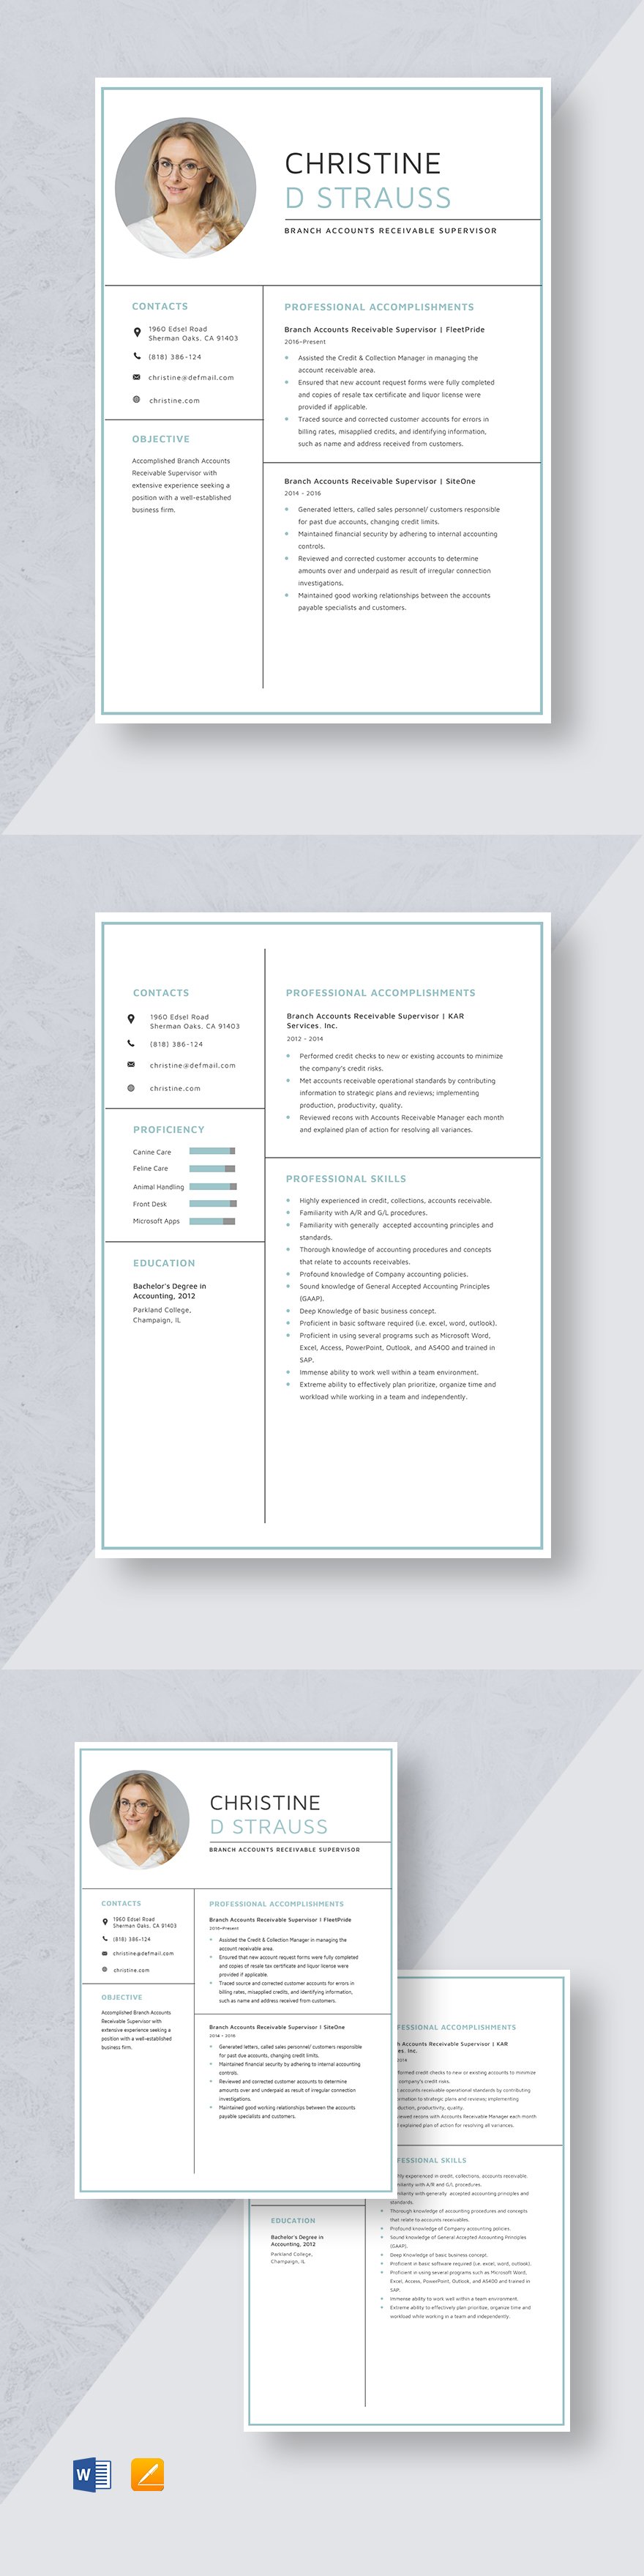 Free Branch Accounts Receivable Supervisor Resume Template